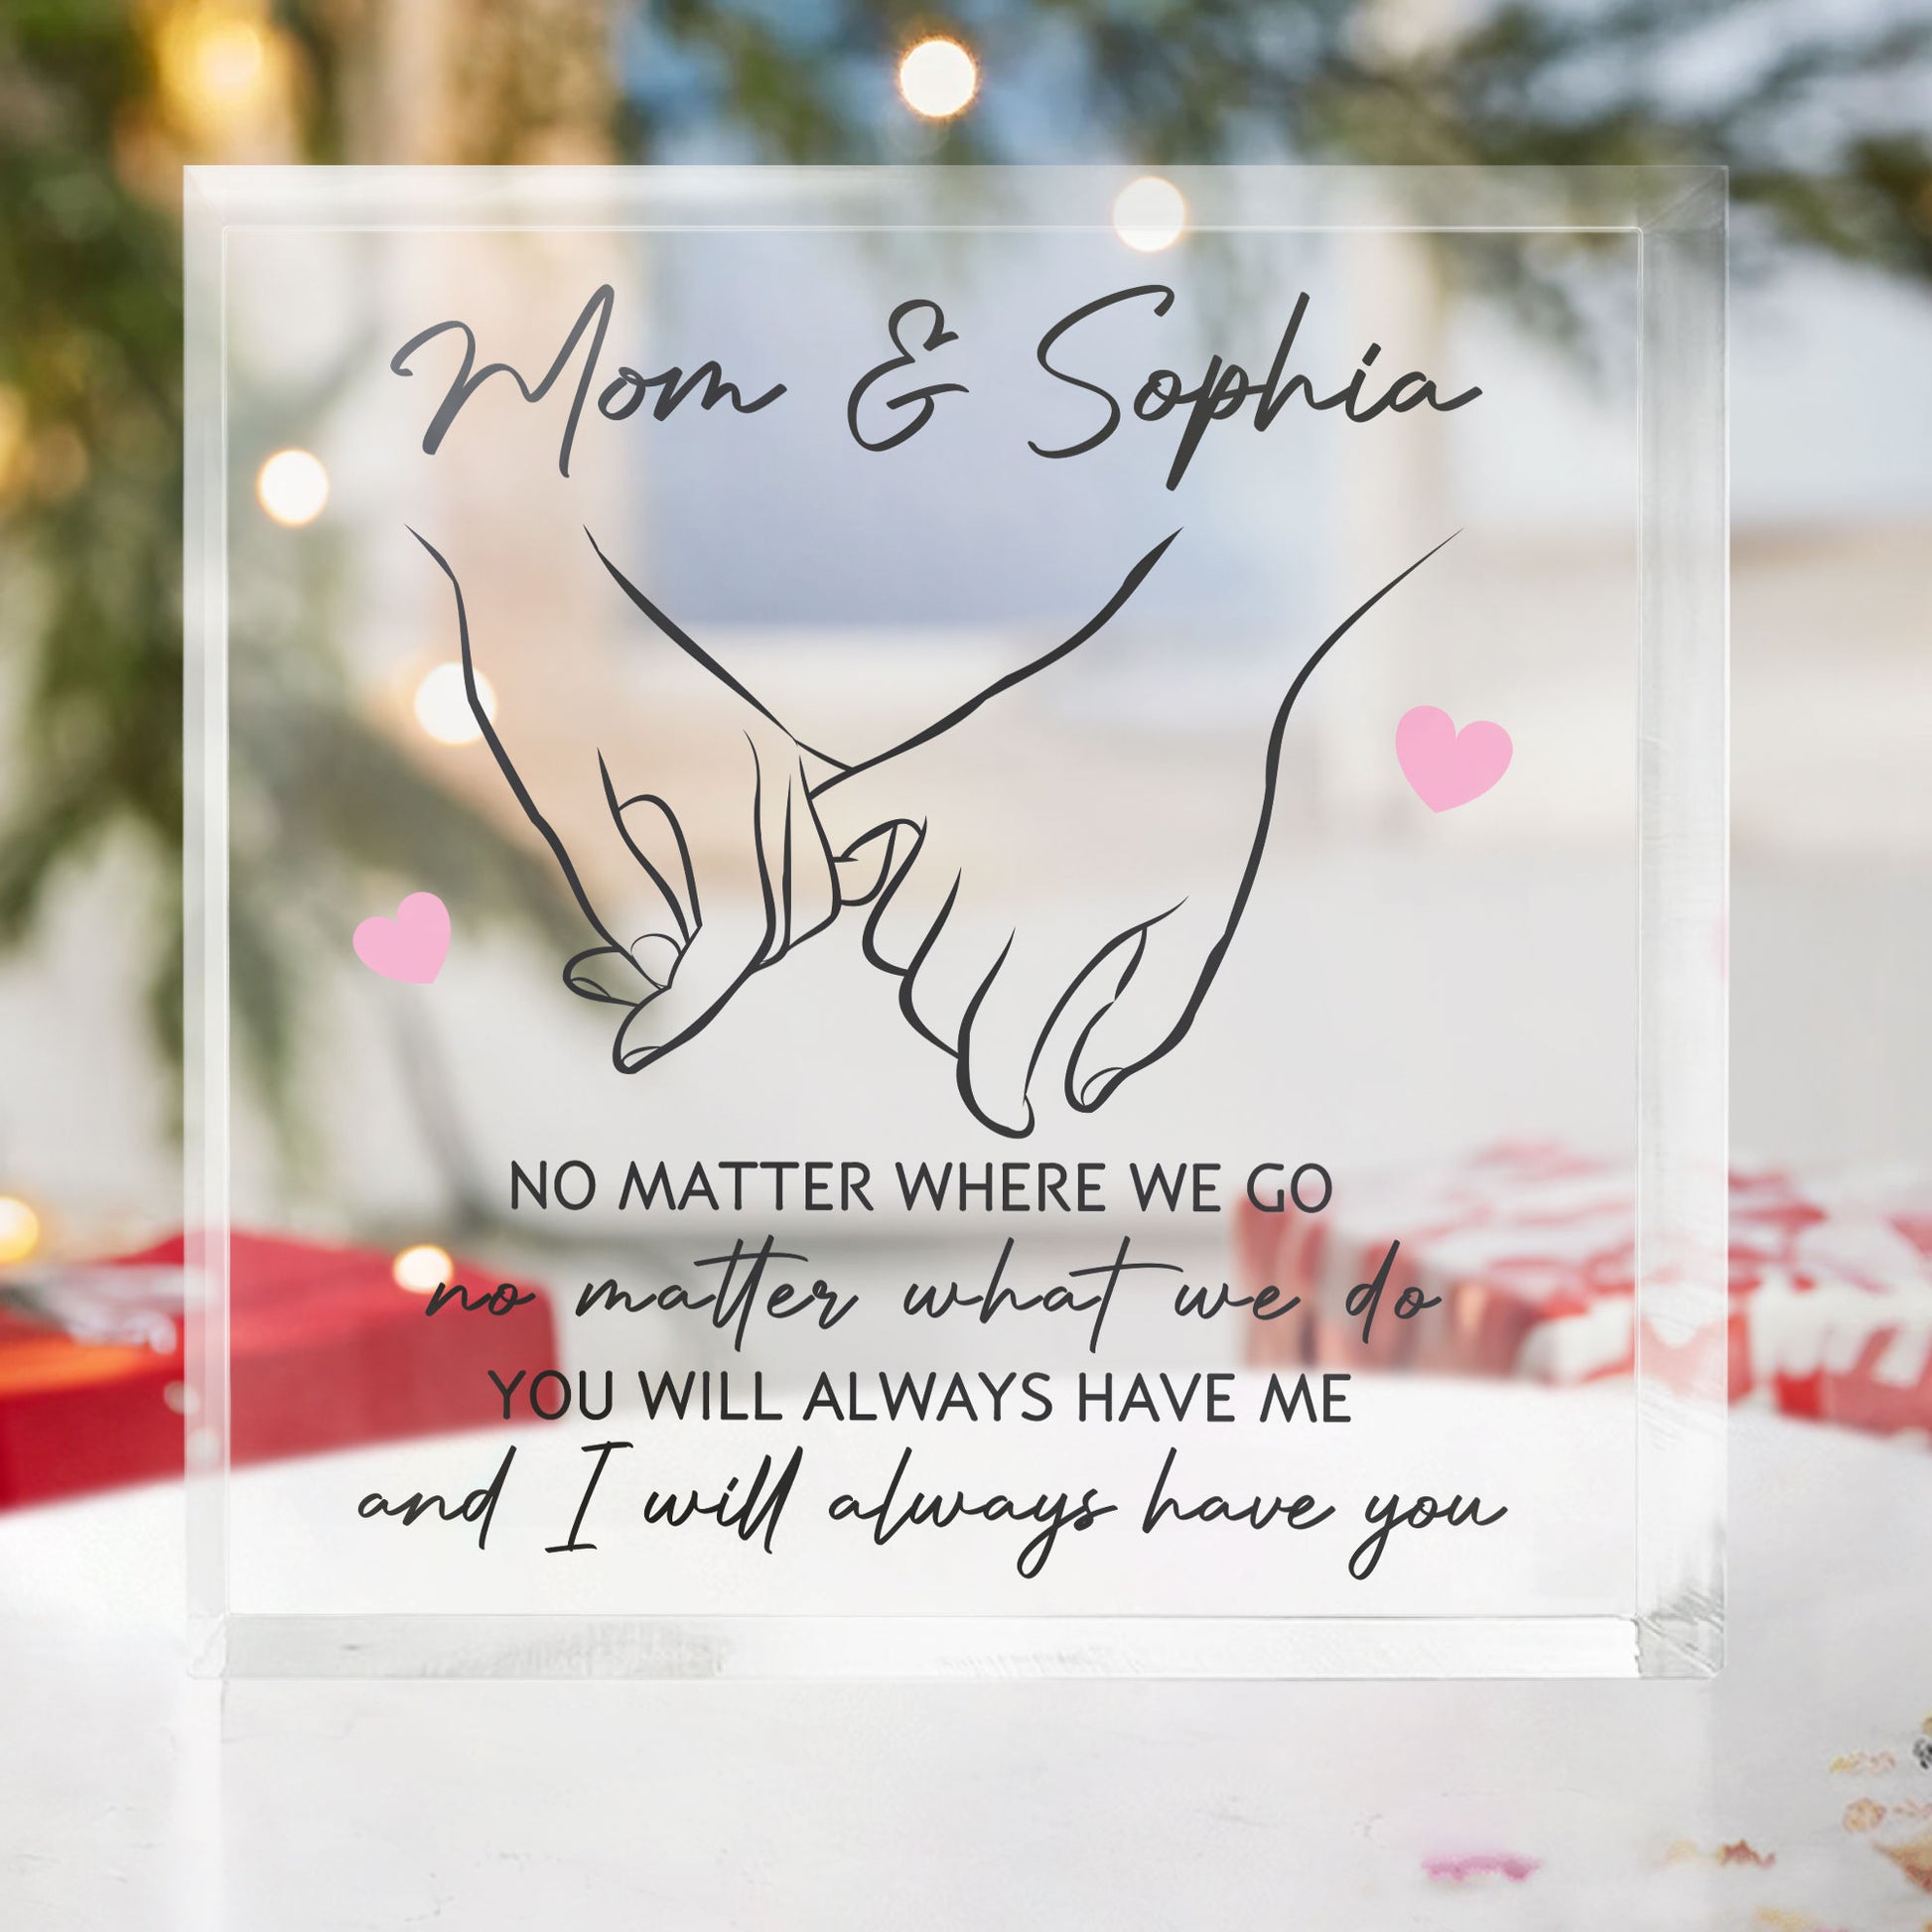 Mother And Daughter Holding Hand I Will Always Have You - Personalized Acrylic Plaque